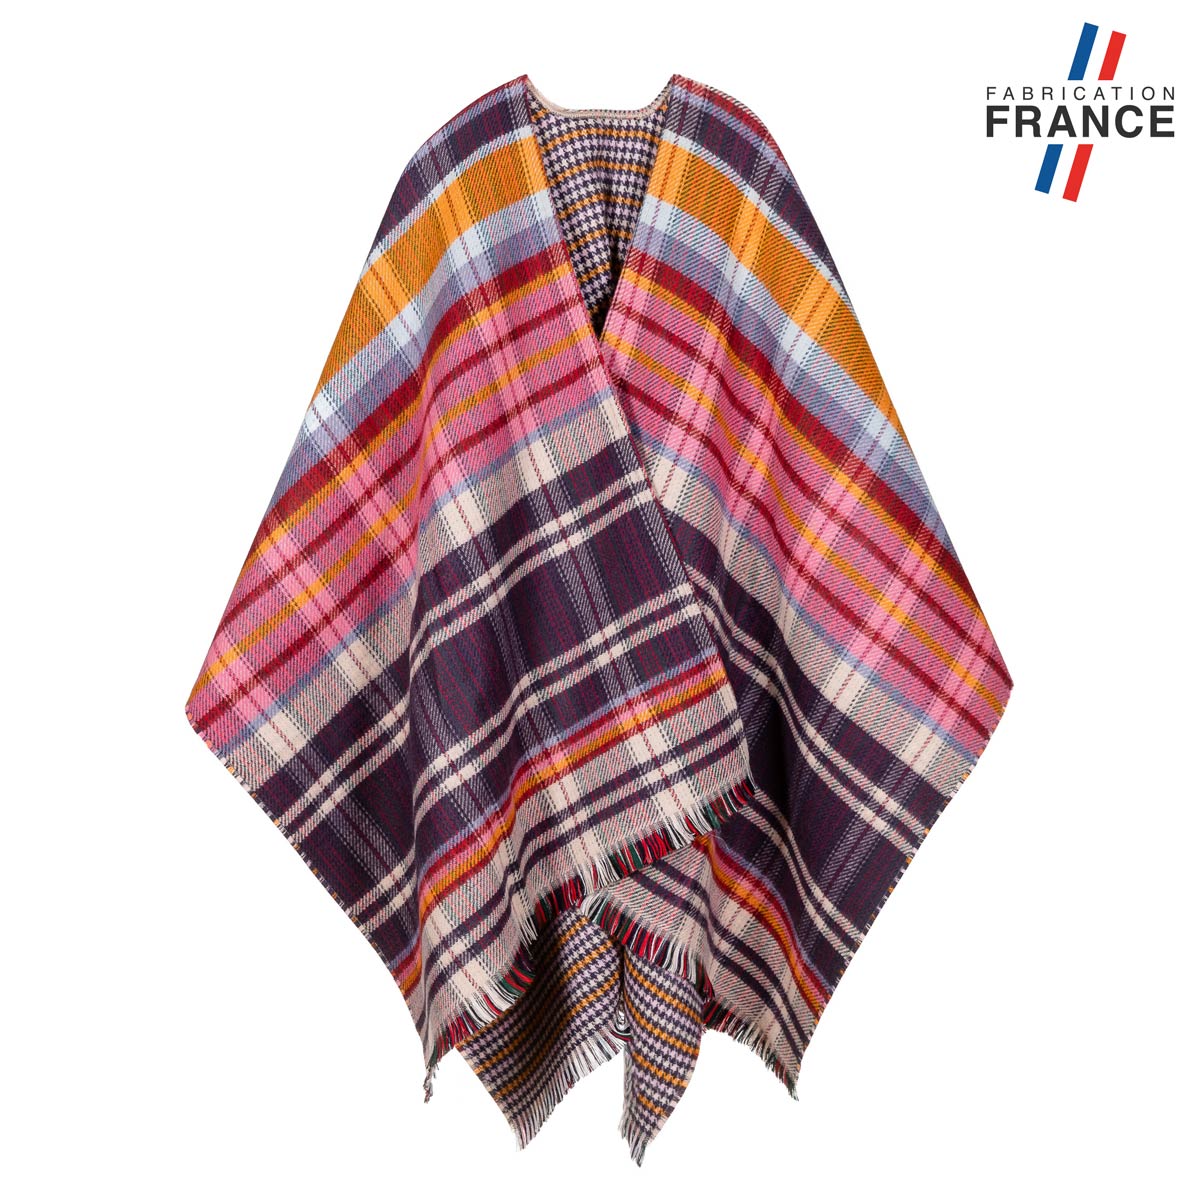 Poncho-multicolore-fabrication-francaise--AT-06171_F1-12FR